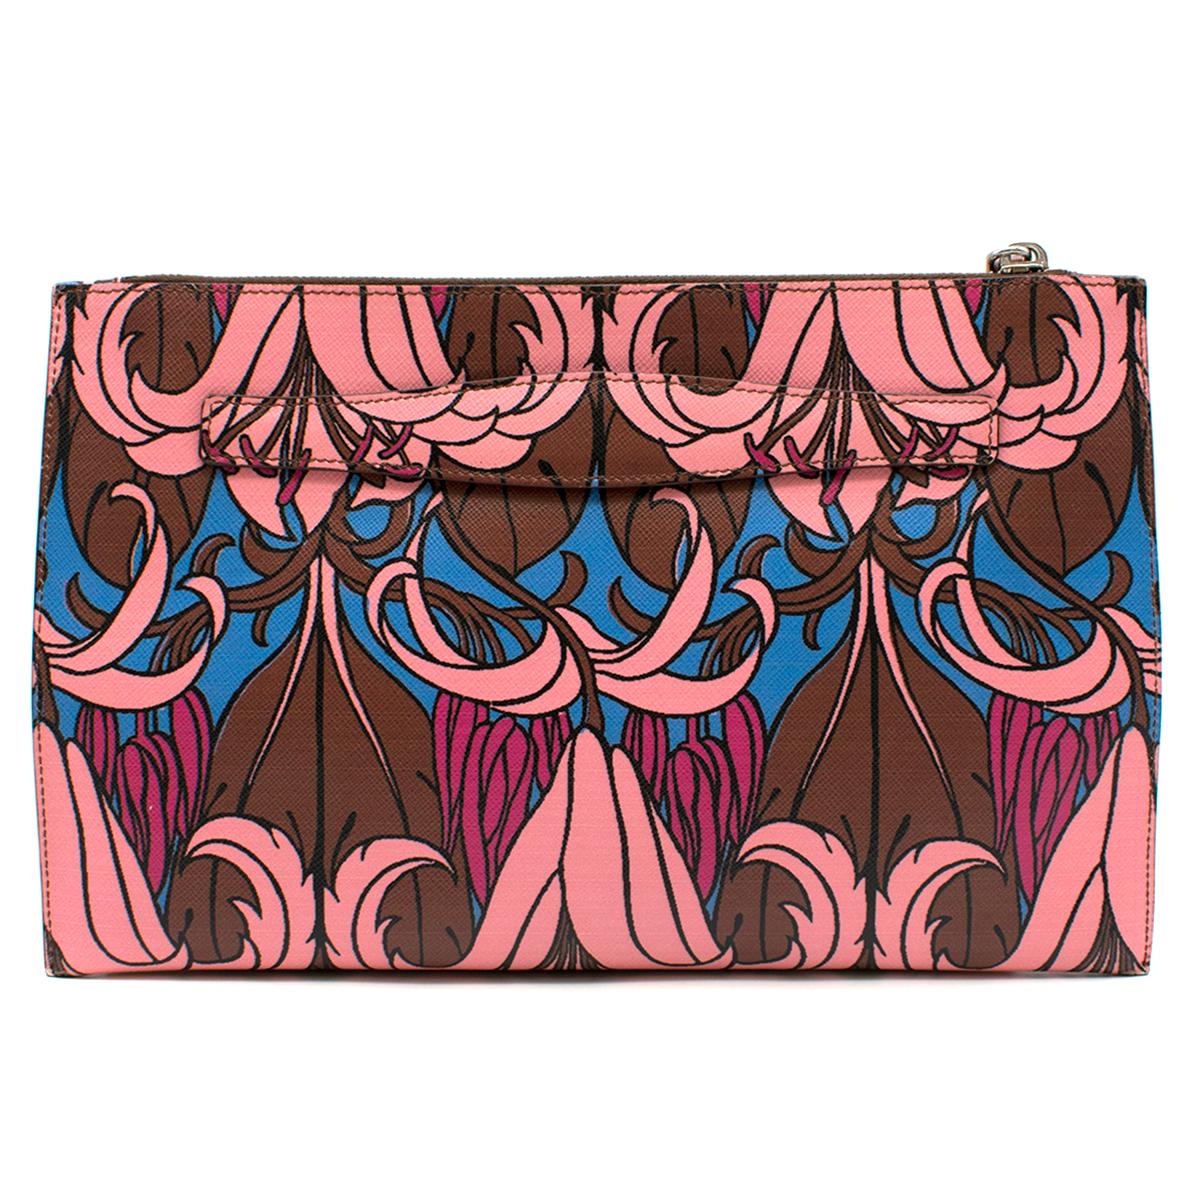 Prada Saffiano Floral Print Clutch

- Multi Colored Clutch Pochette
- Saffiano leather
- Brown, pink, blue floral print 
- Exterior: Zipped top opening with buckle closure, hand strap, silver tone hardware
- Interior:  Brown leather lining, zipped